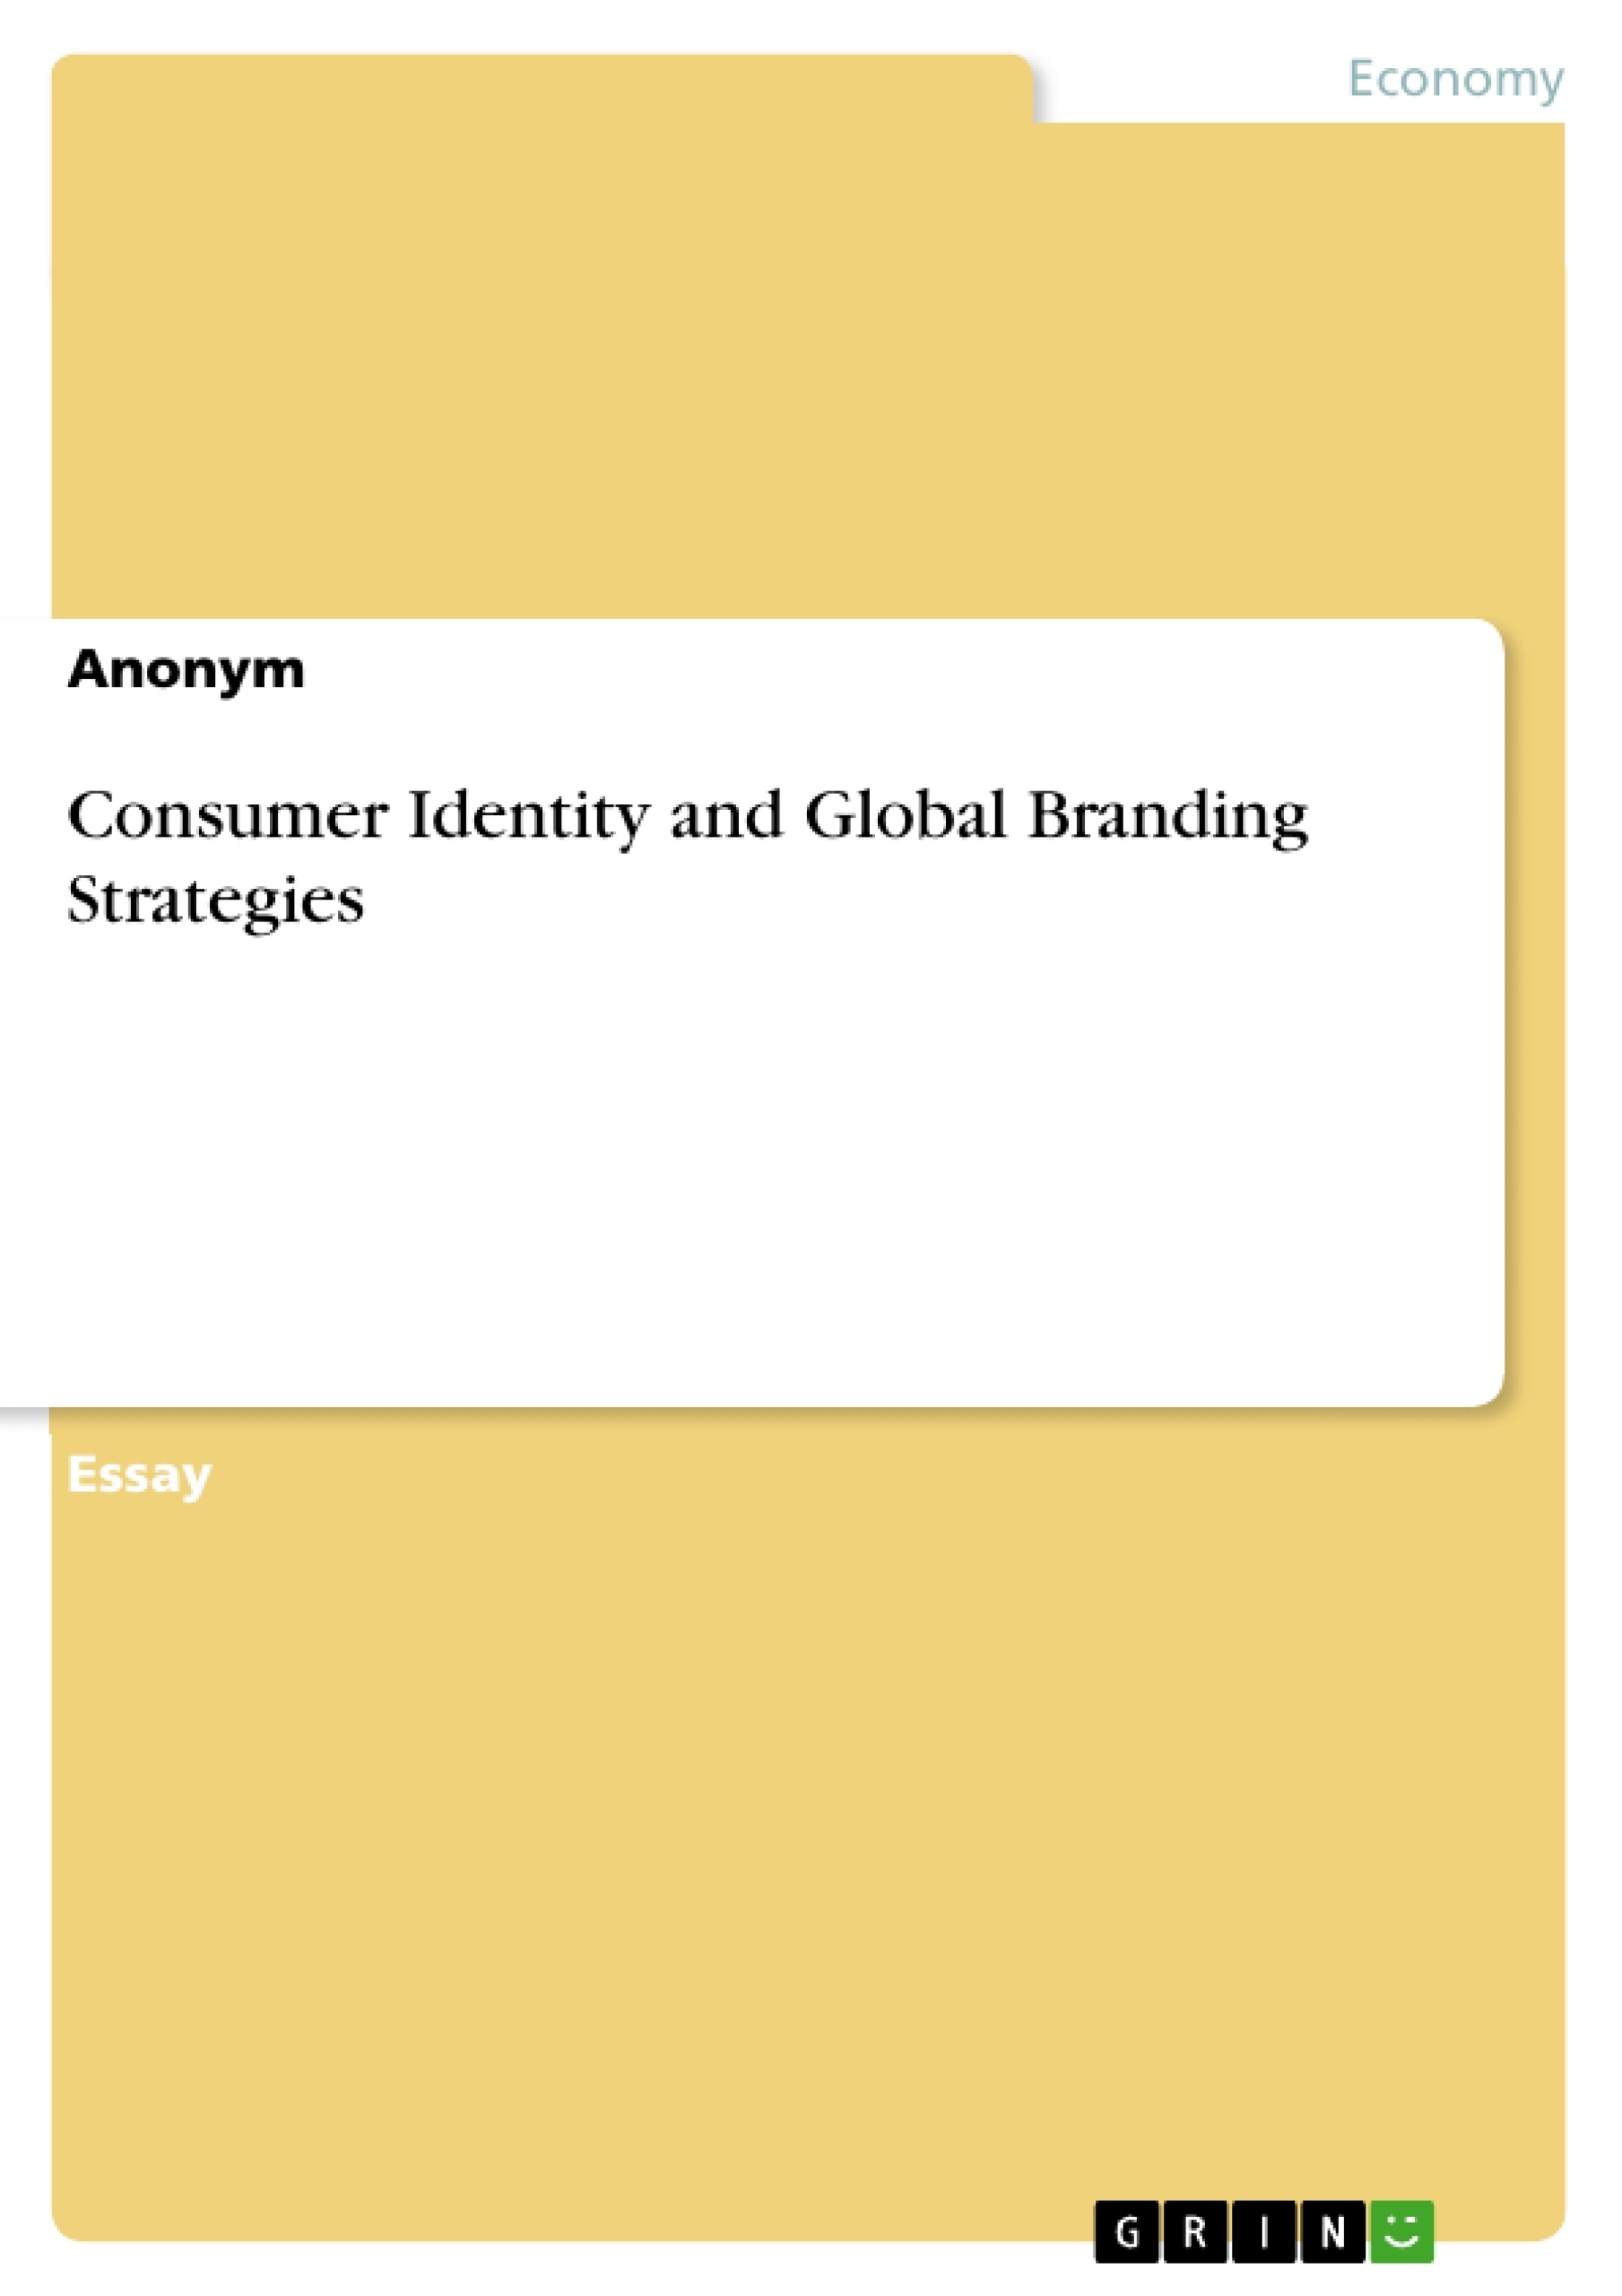 Title: Consumer Identity and Global Branding Strategies